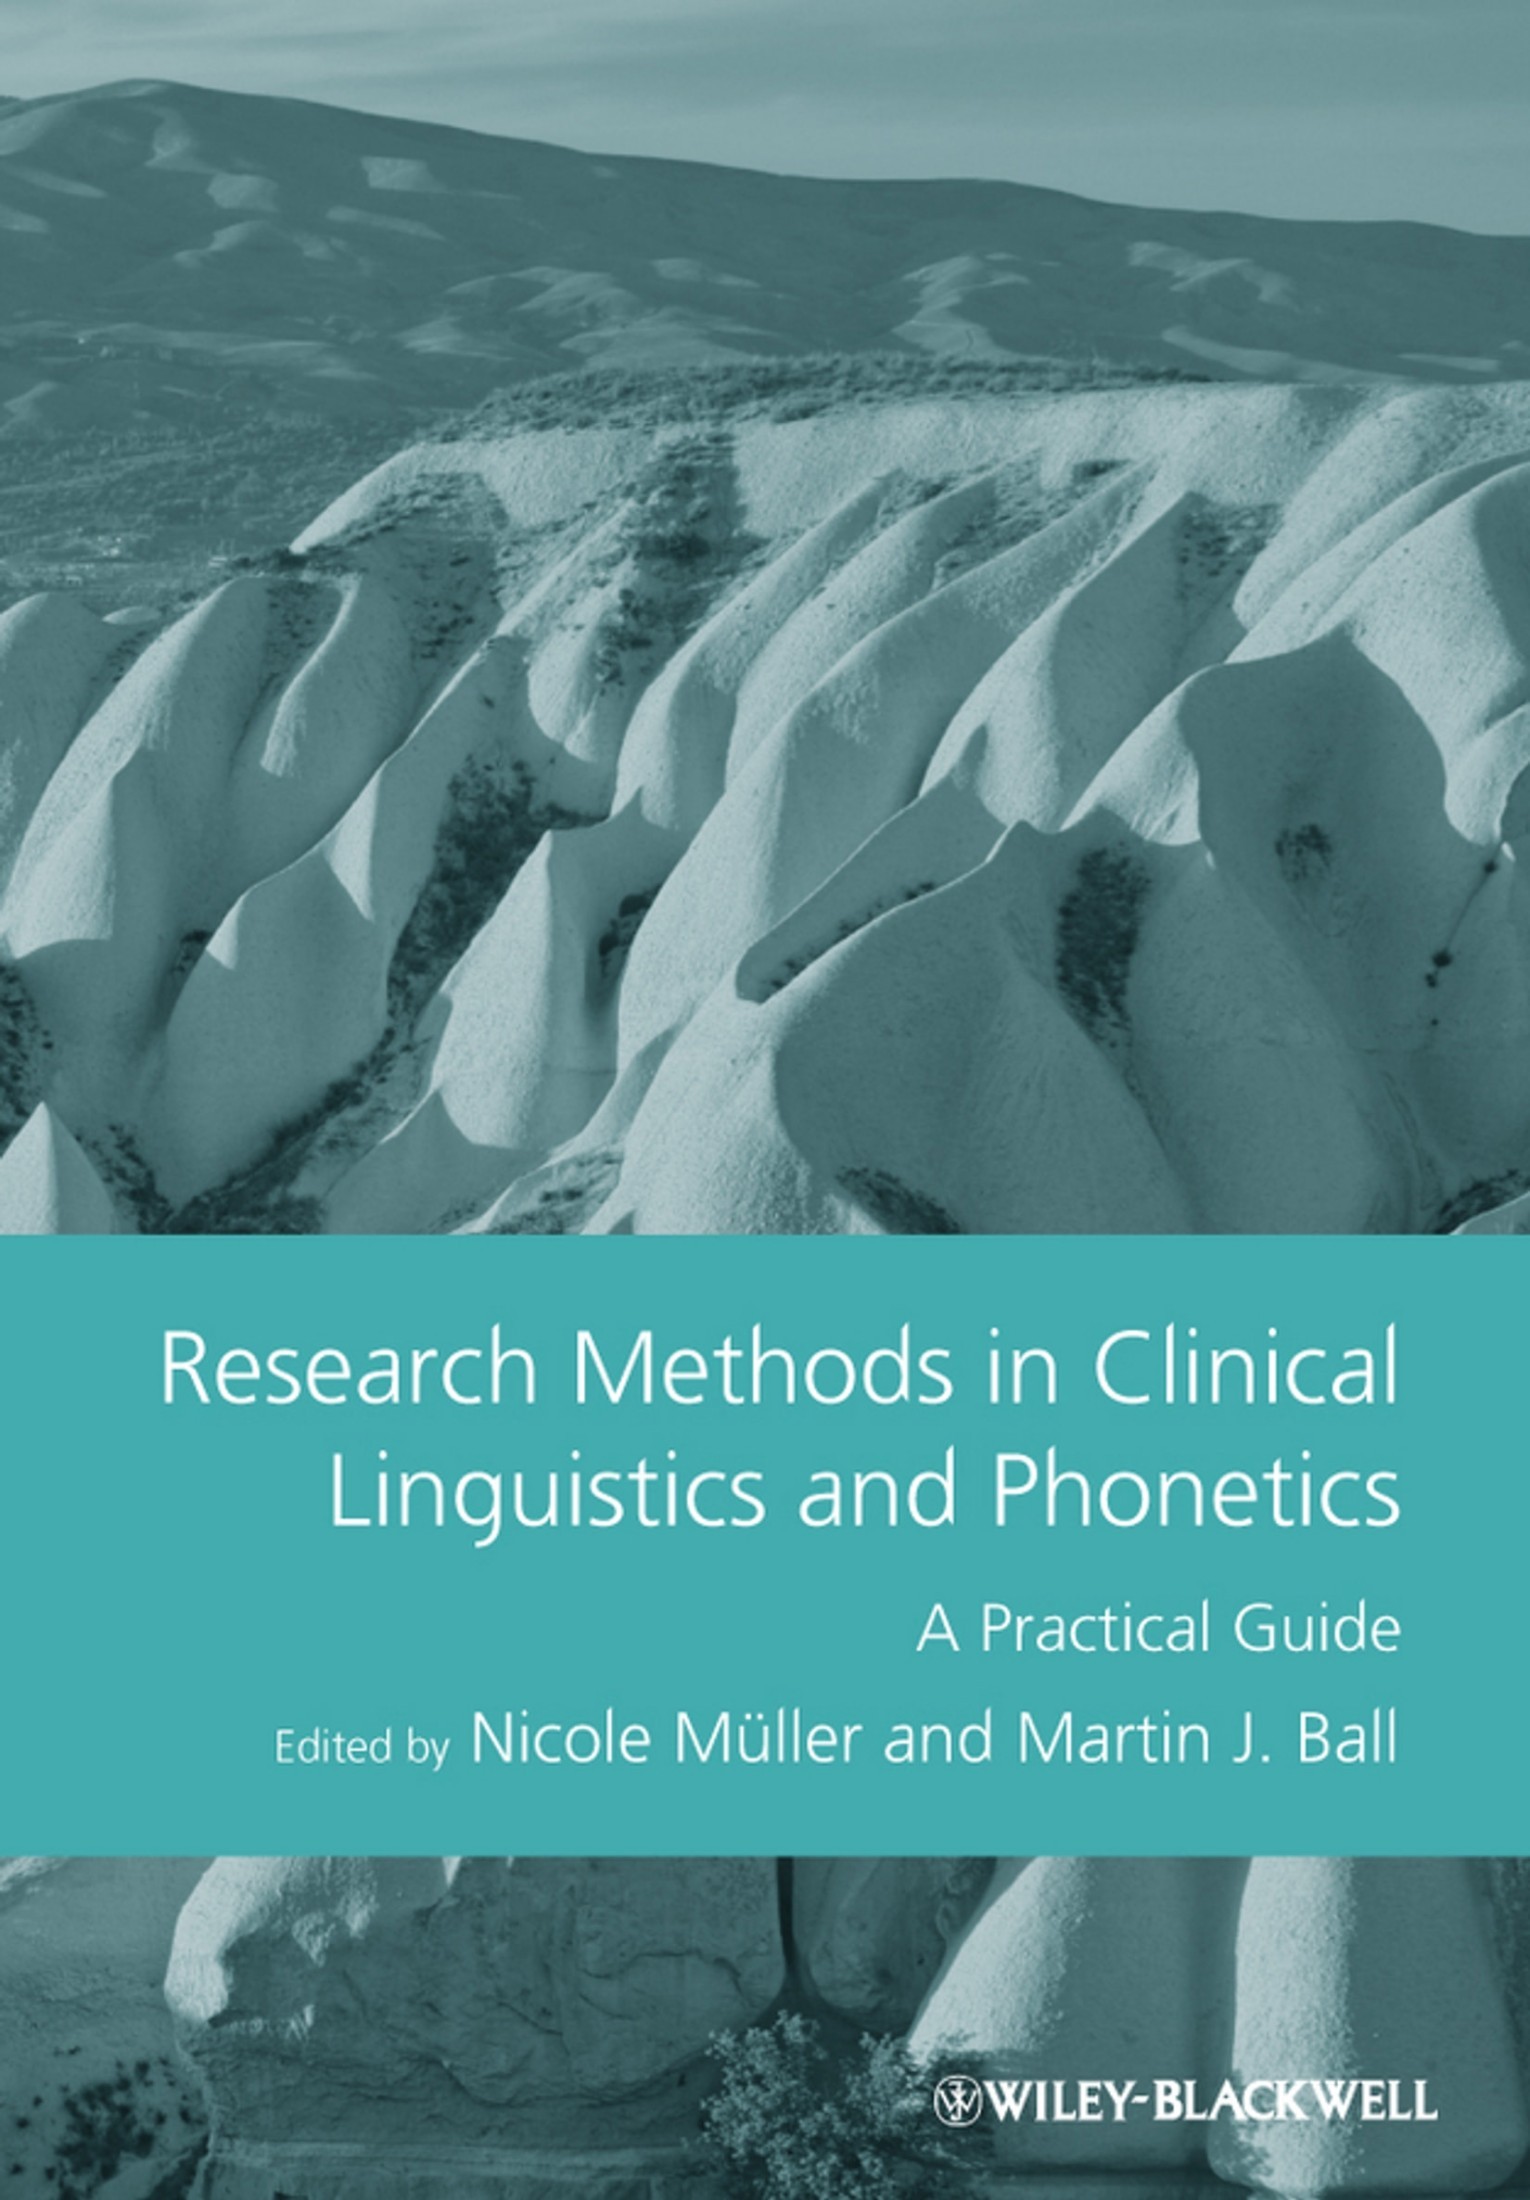 Research Methods in Language Policy and Planning: A Practical Guide